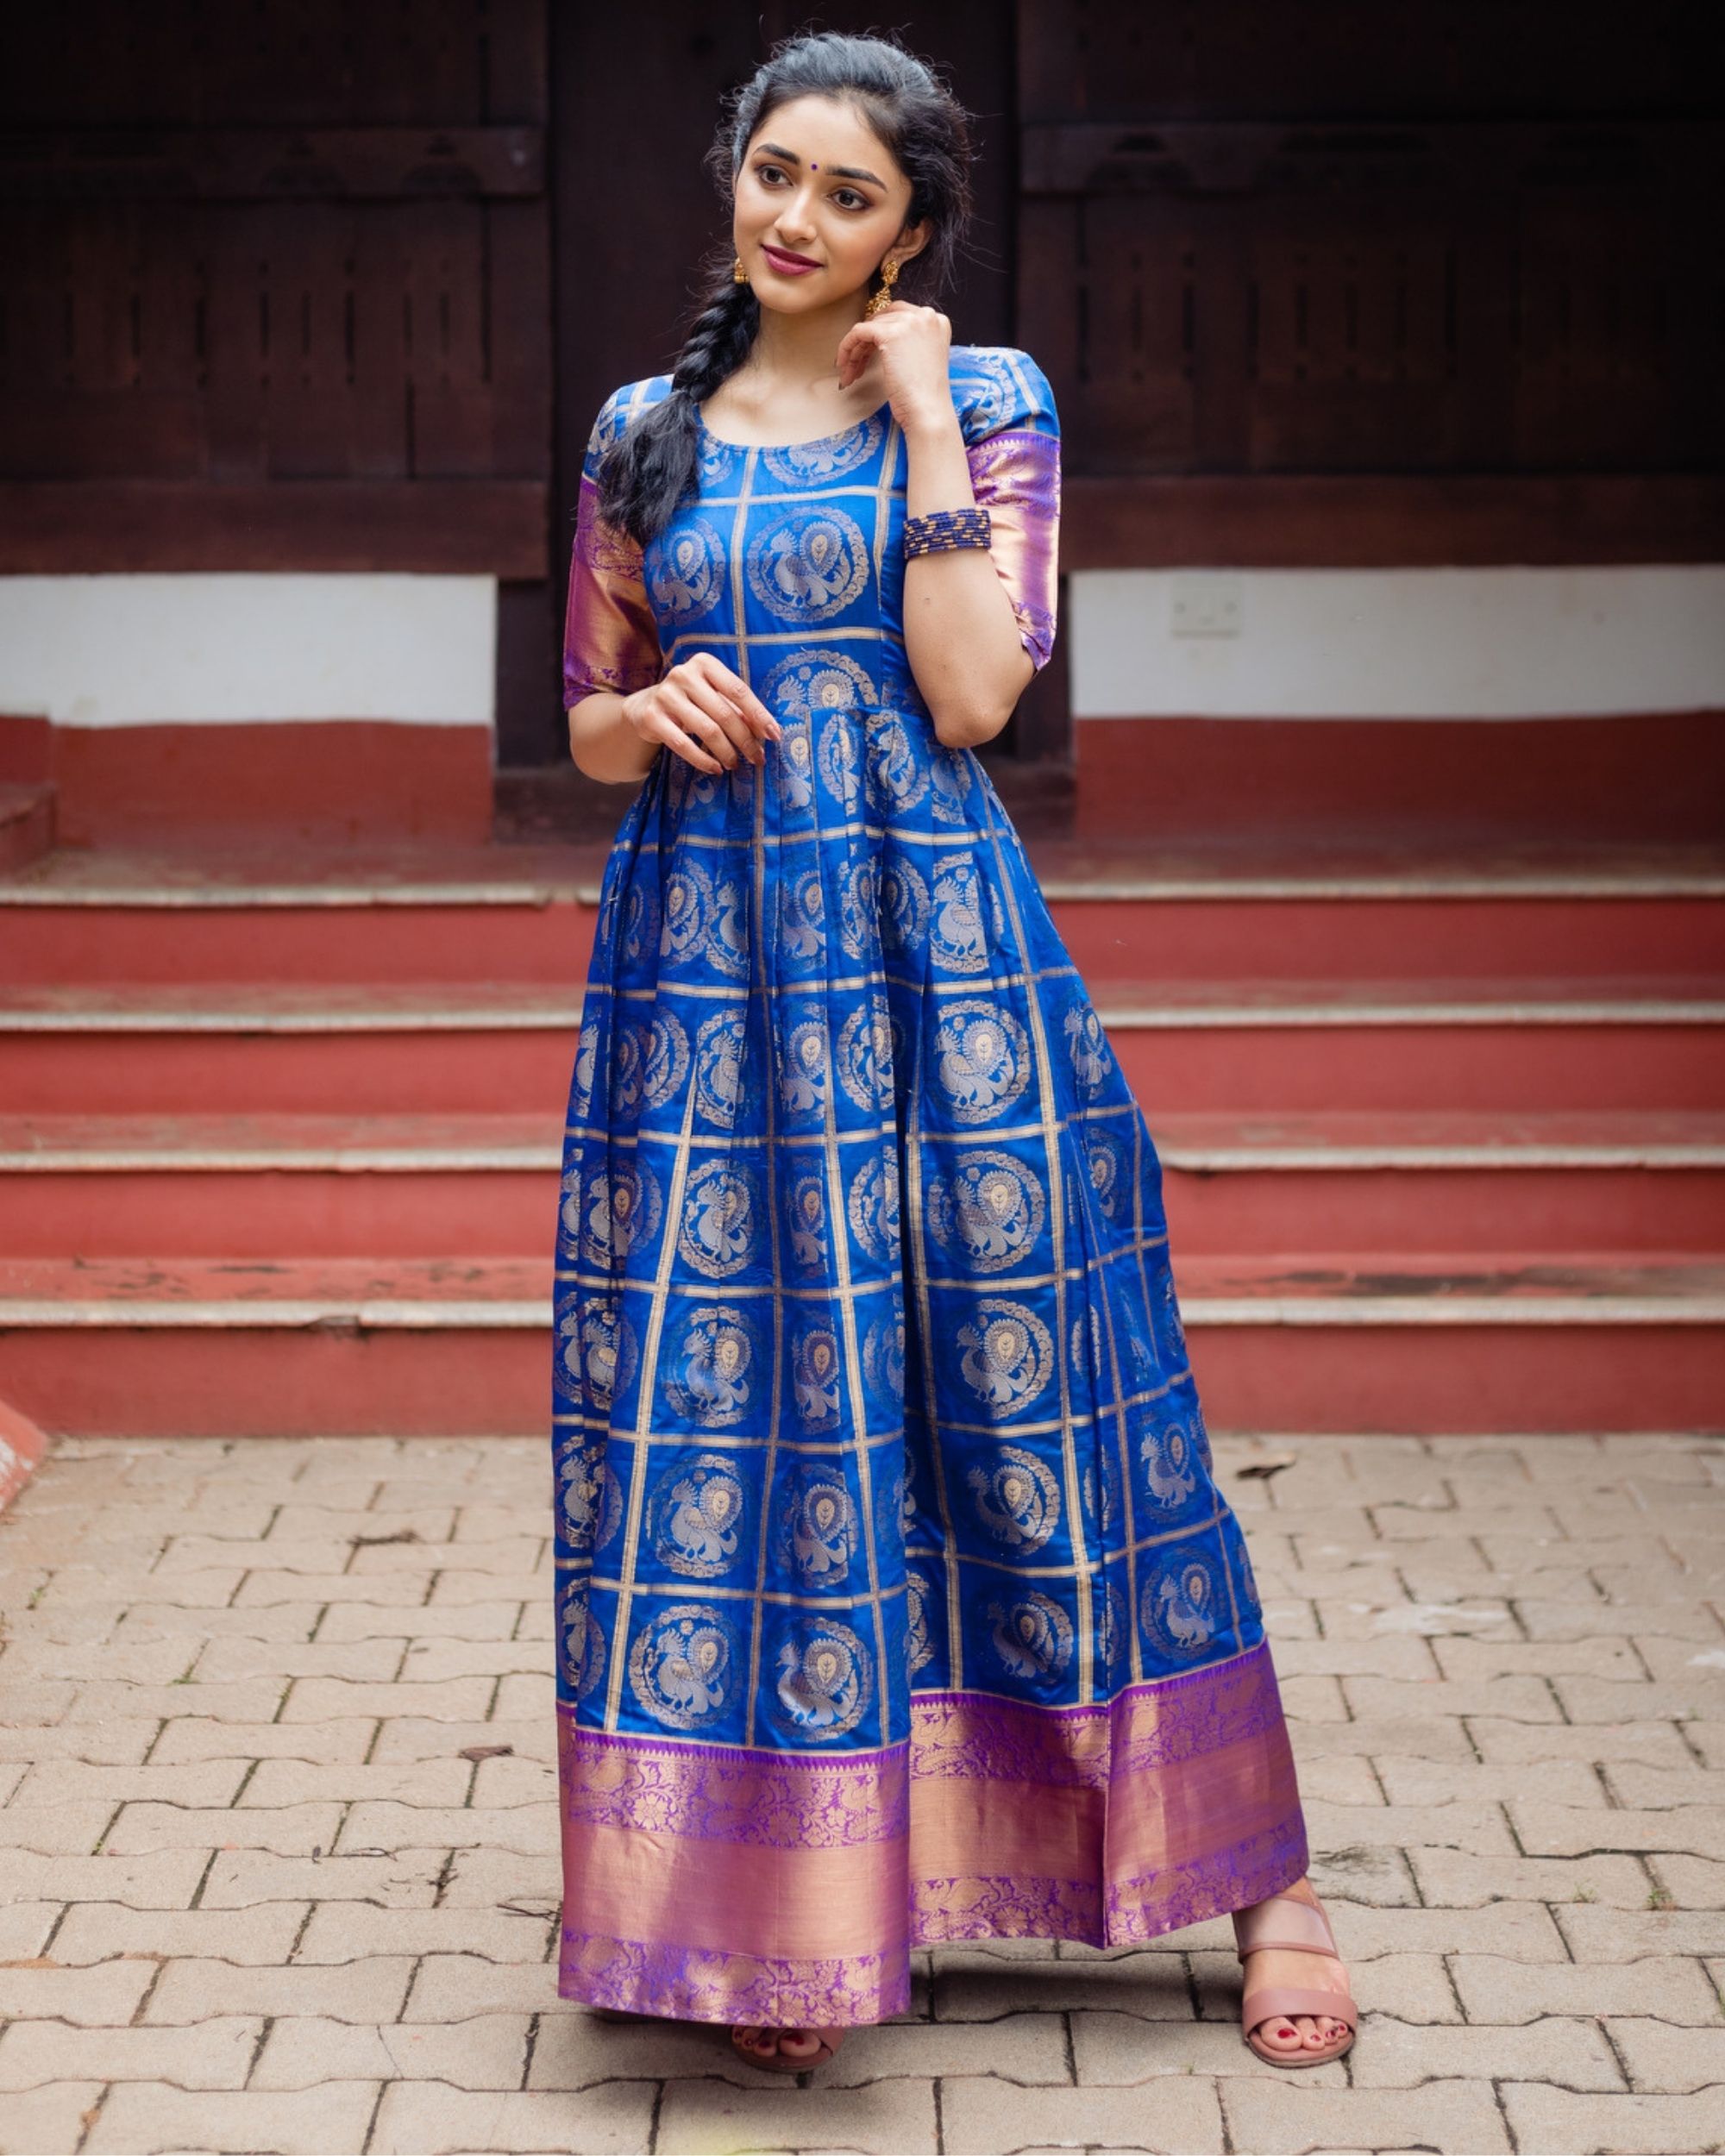 Anarkali Style Peacock Blue Embroidered Gown